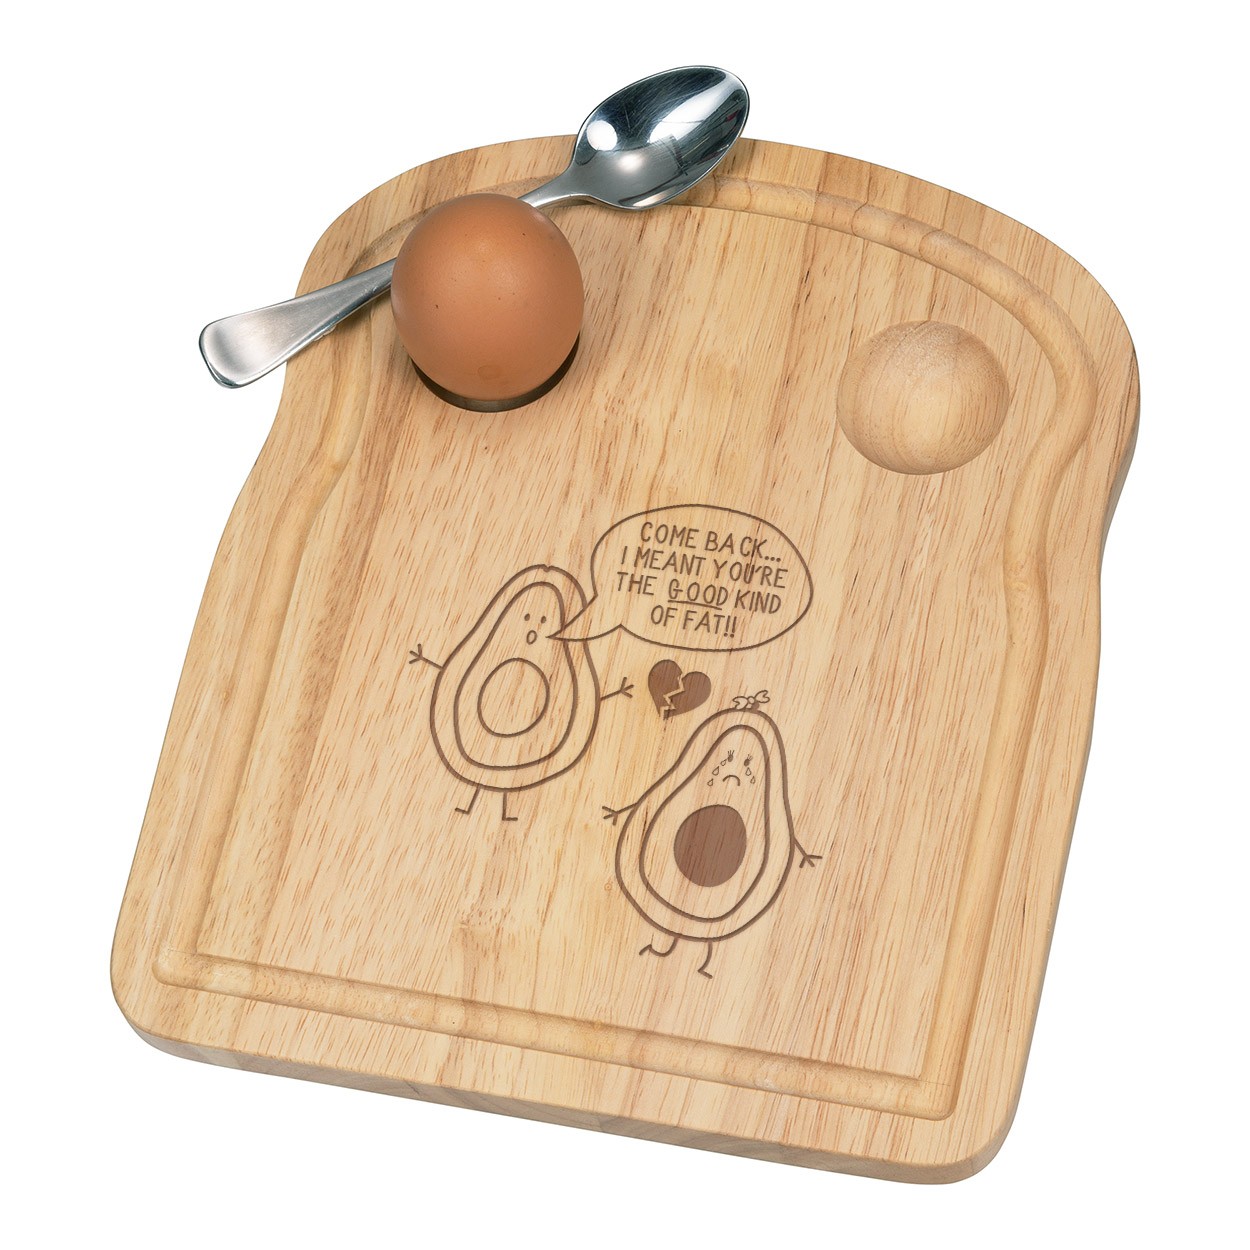 Avocado The Good Kind Of Fat Breakfast Dippy Egg Cup Board Wooden